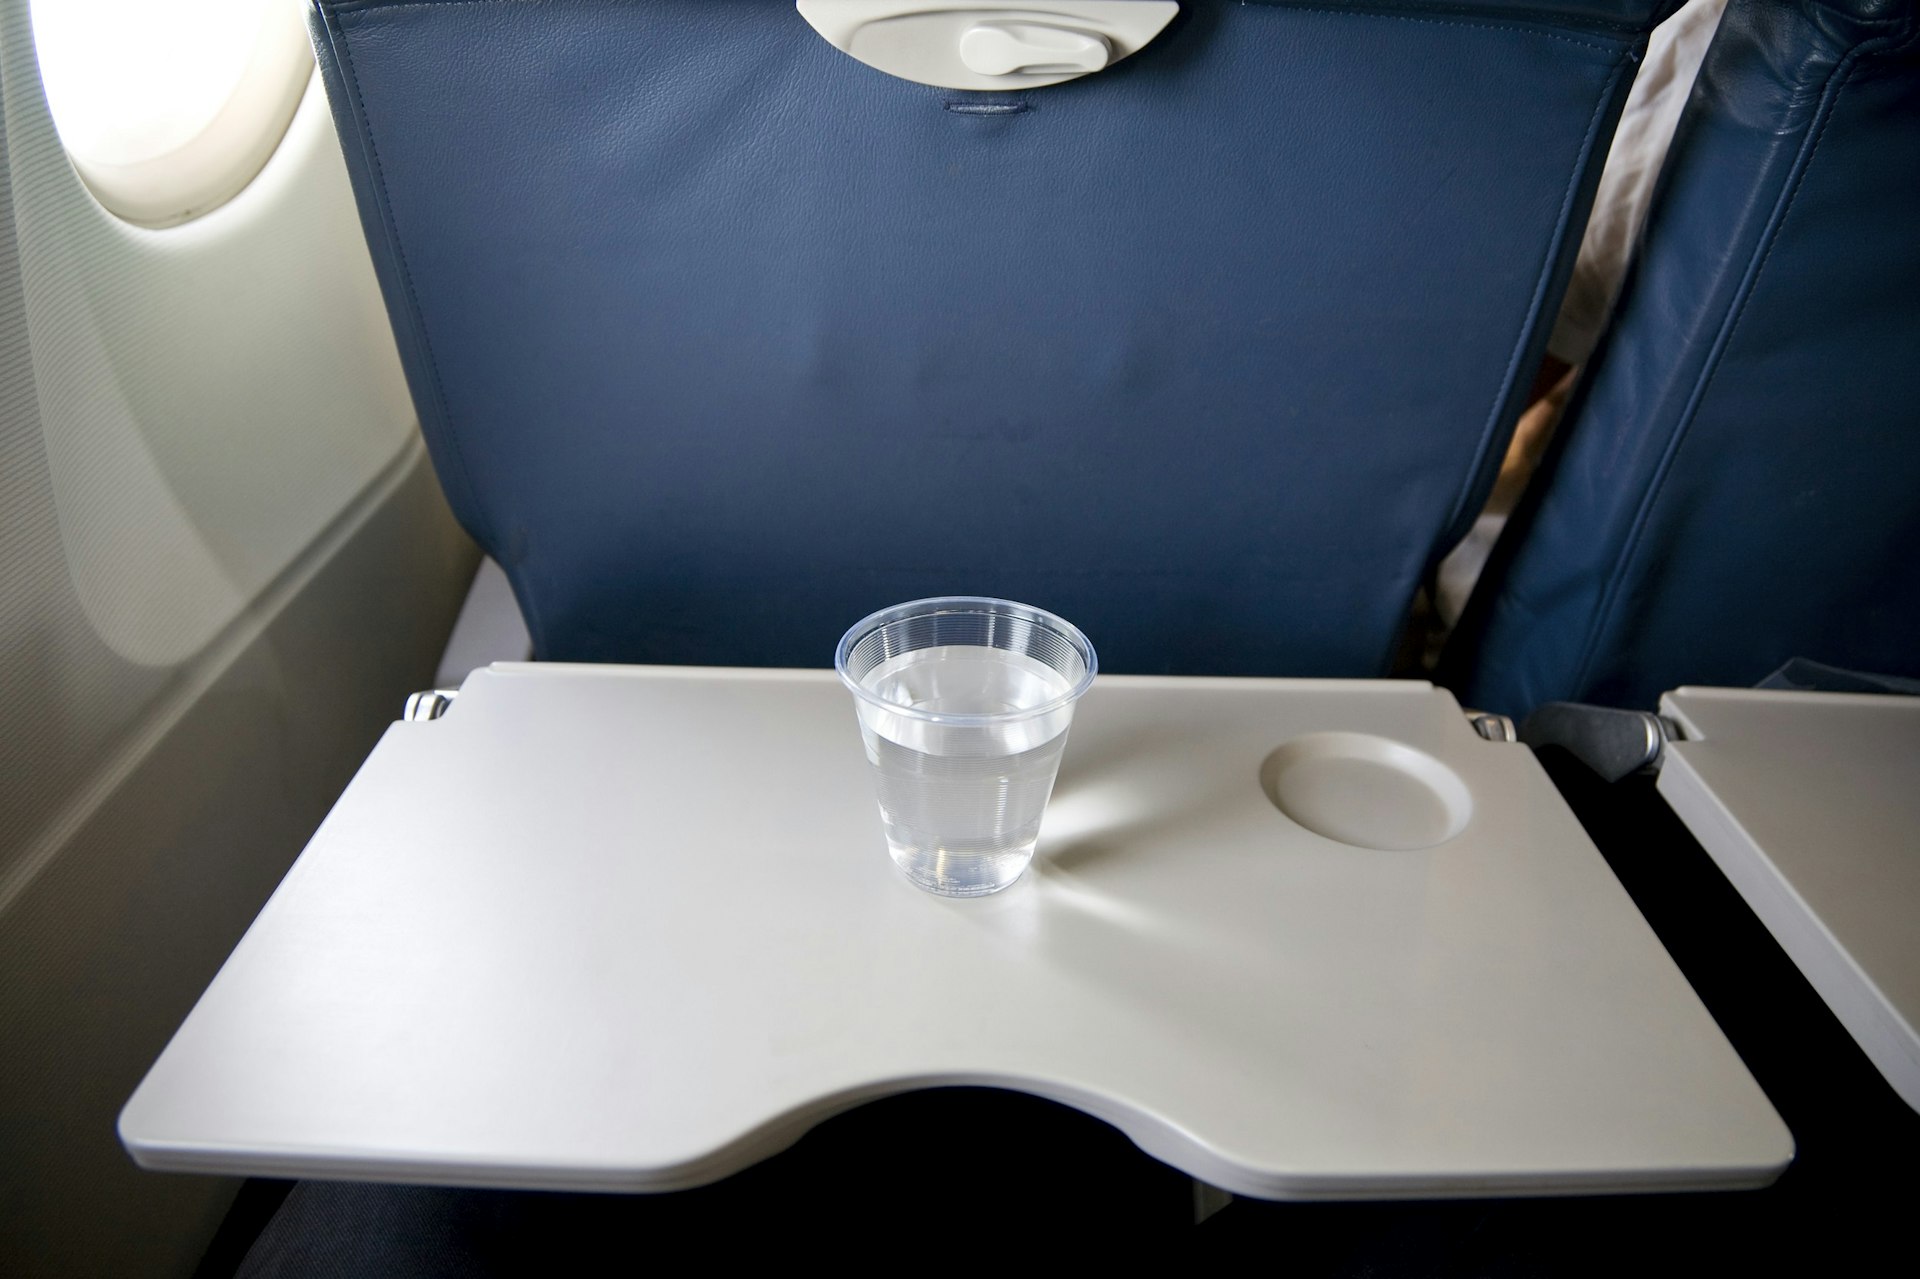 A plastic glass of water sits on a table track on the back of an airplane seat.